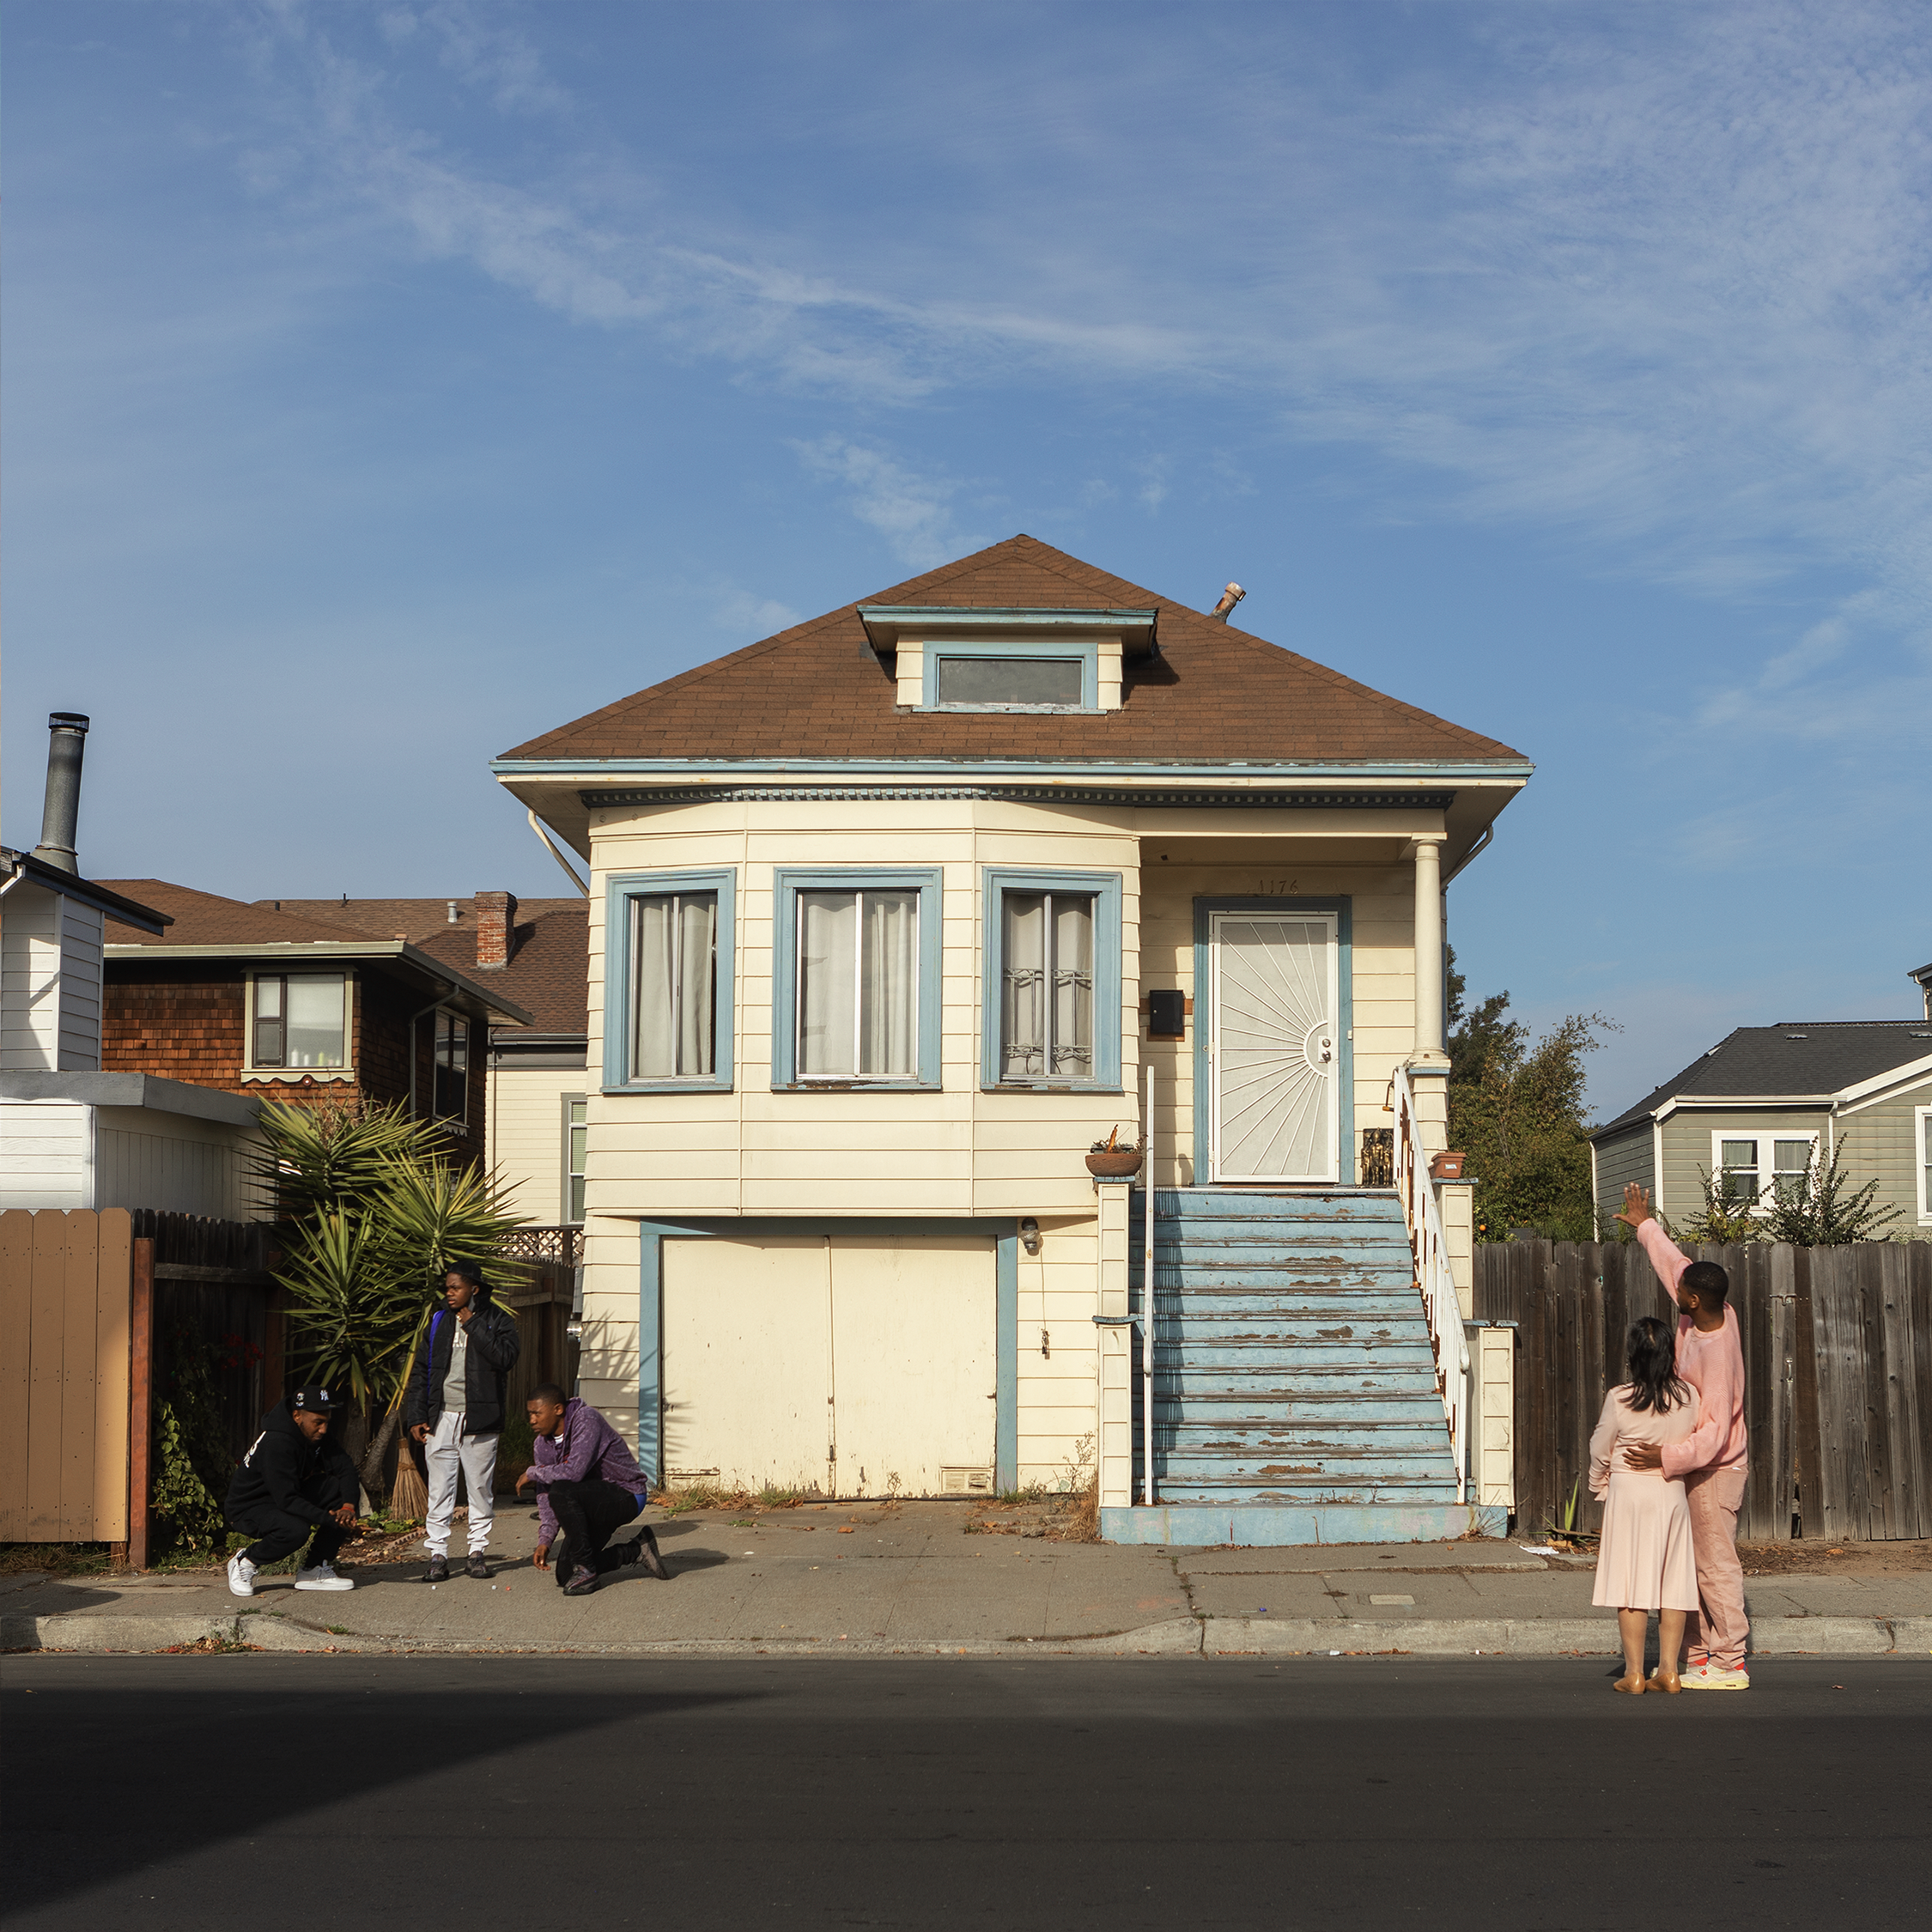 A weathered white and light blue house sits in the middle as a young man in a light pink track suit points toward it with one hand, while holding his grandmother with the other. To the left, three teenagers are gathered as two kneel on the sidewalk playing dice.